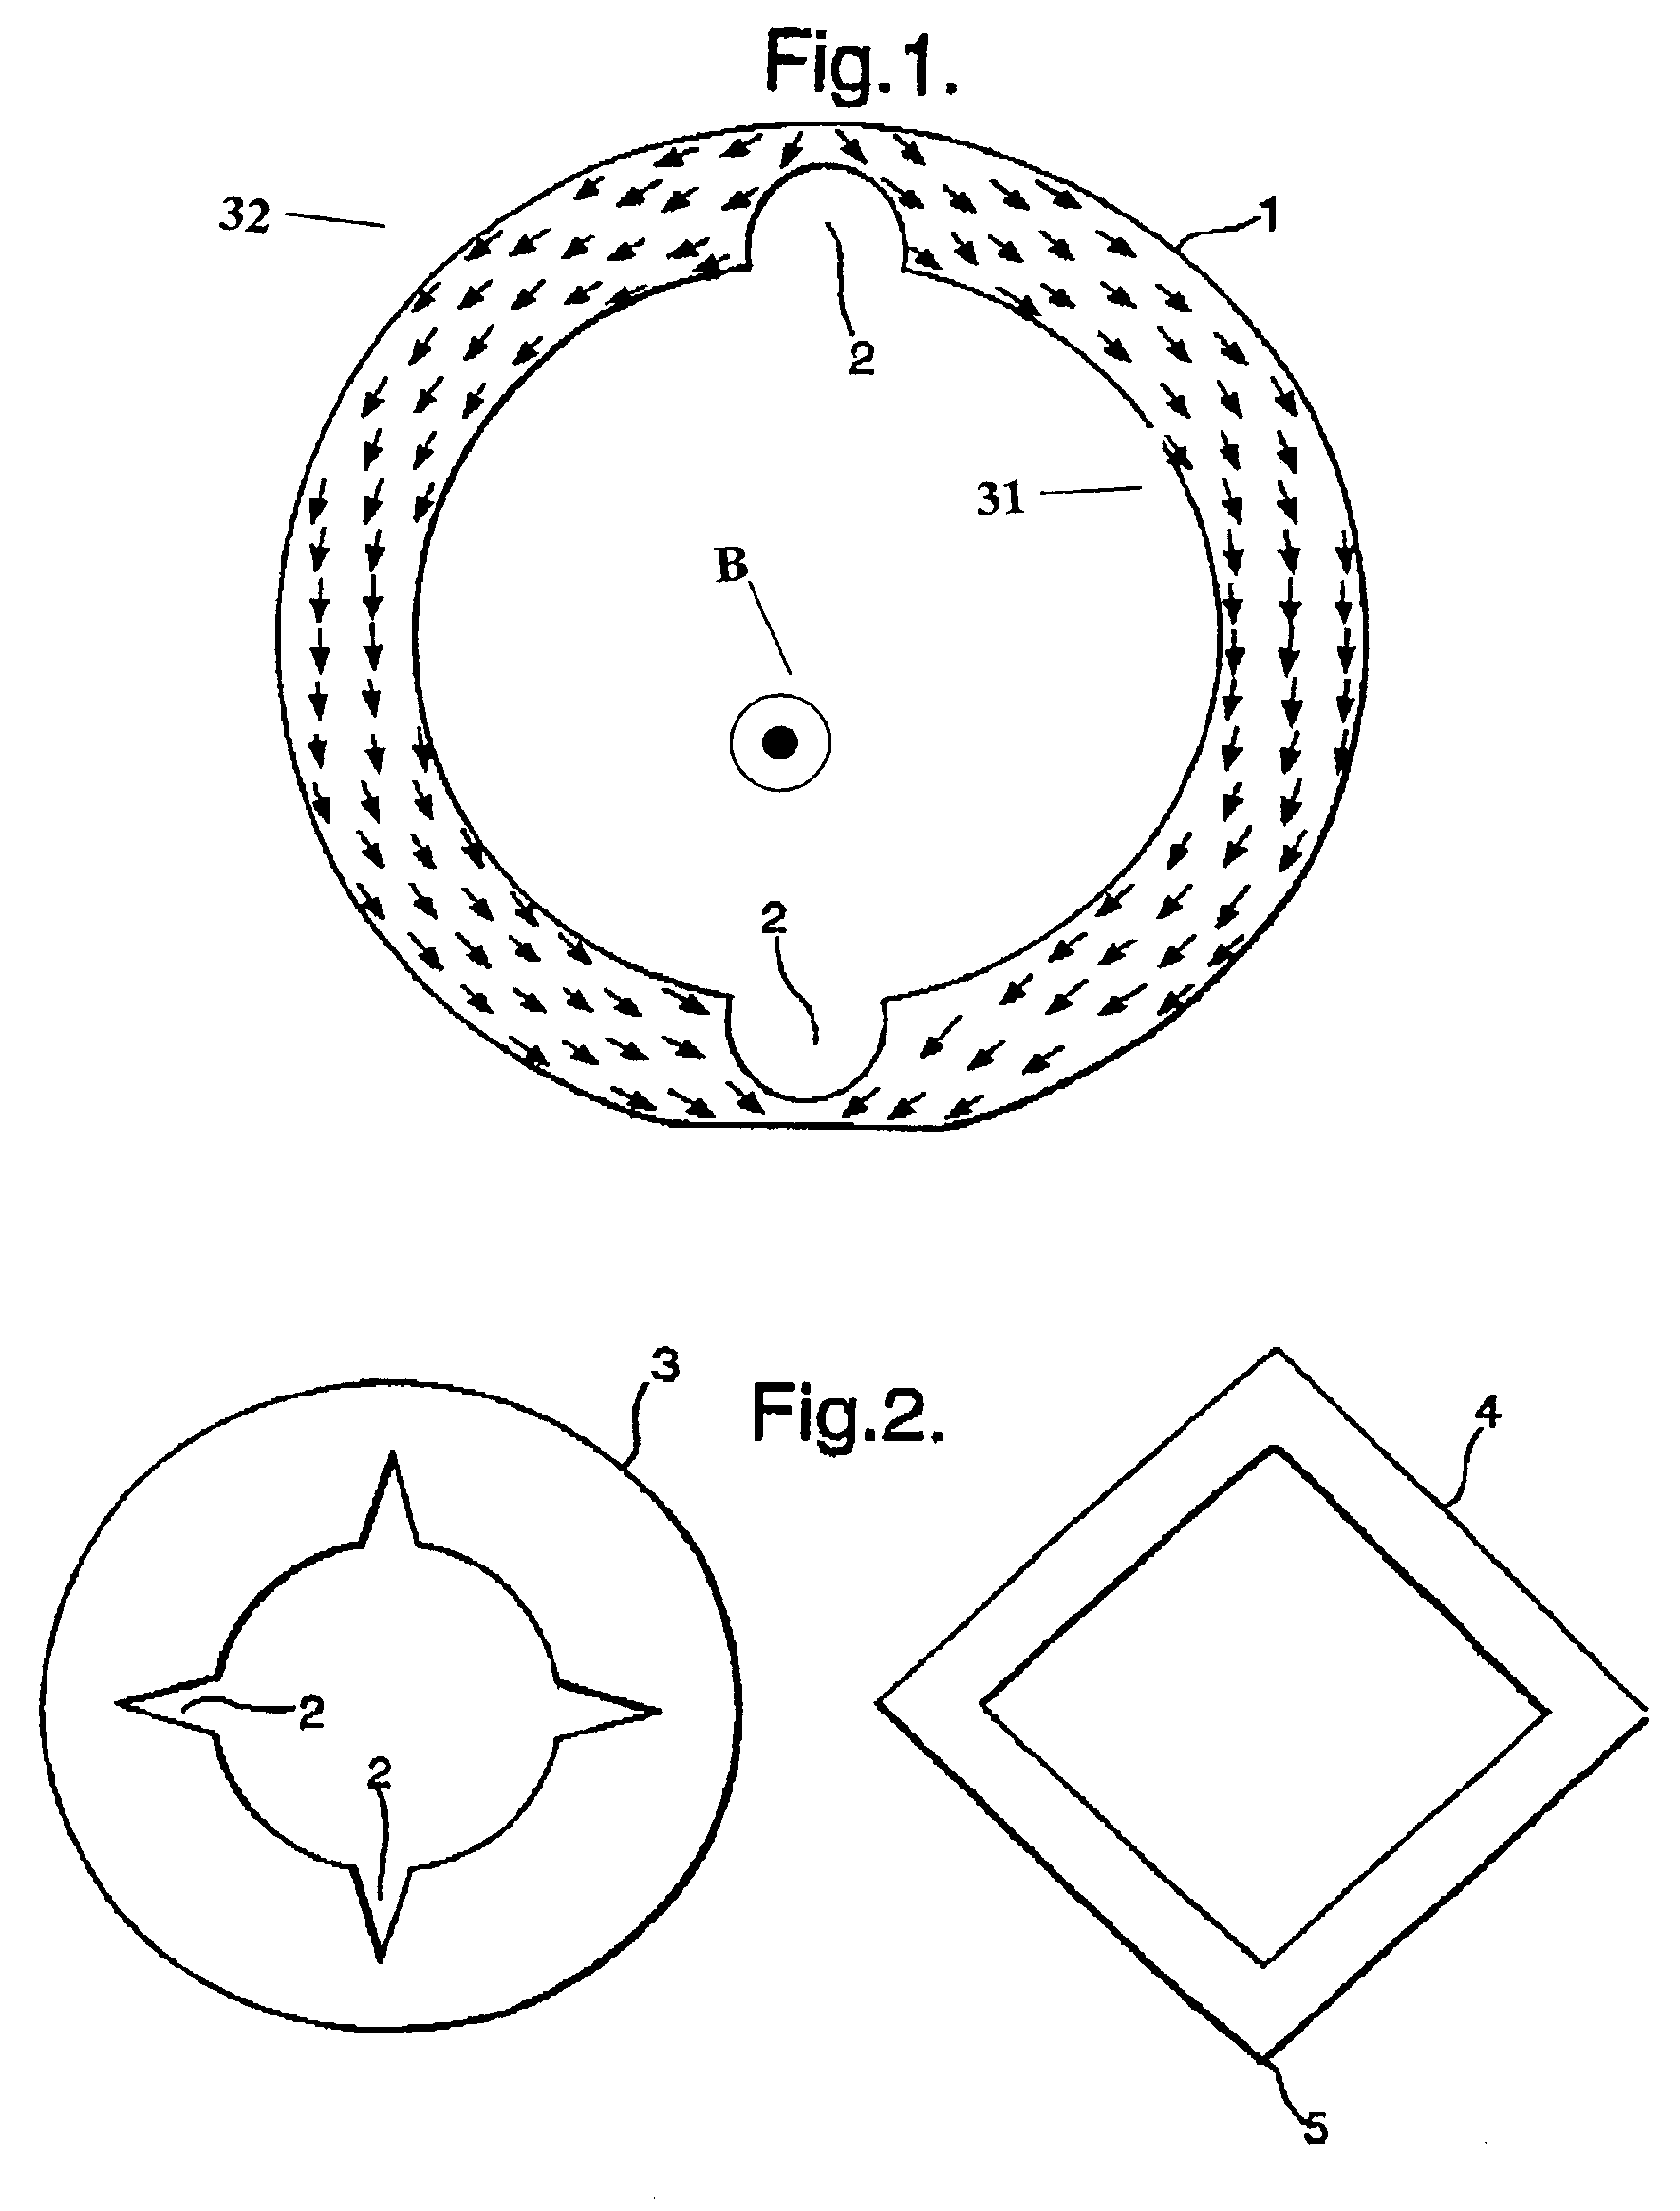 Magnetic element with switchable domain structure